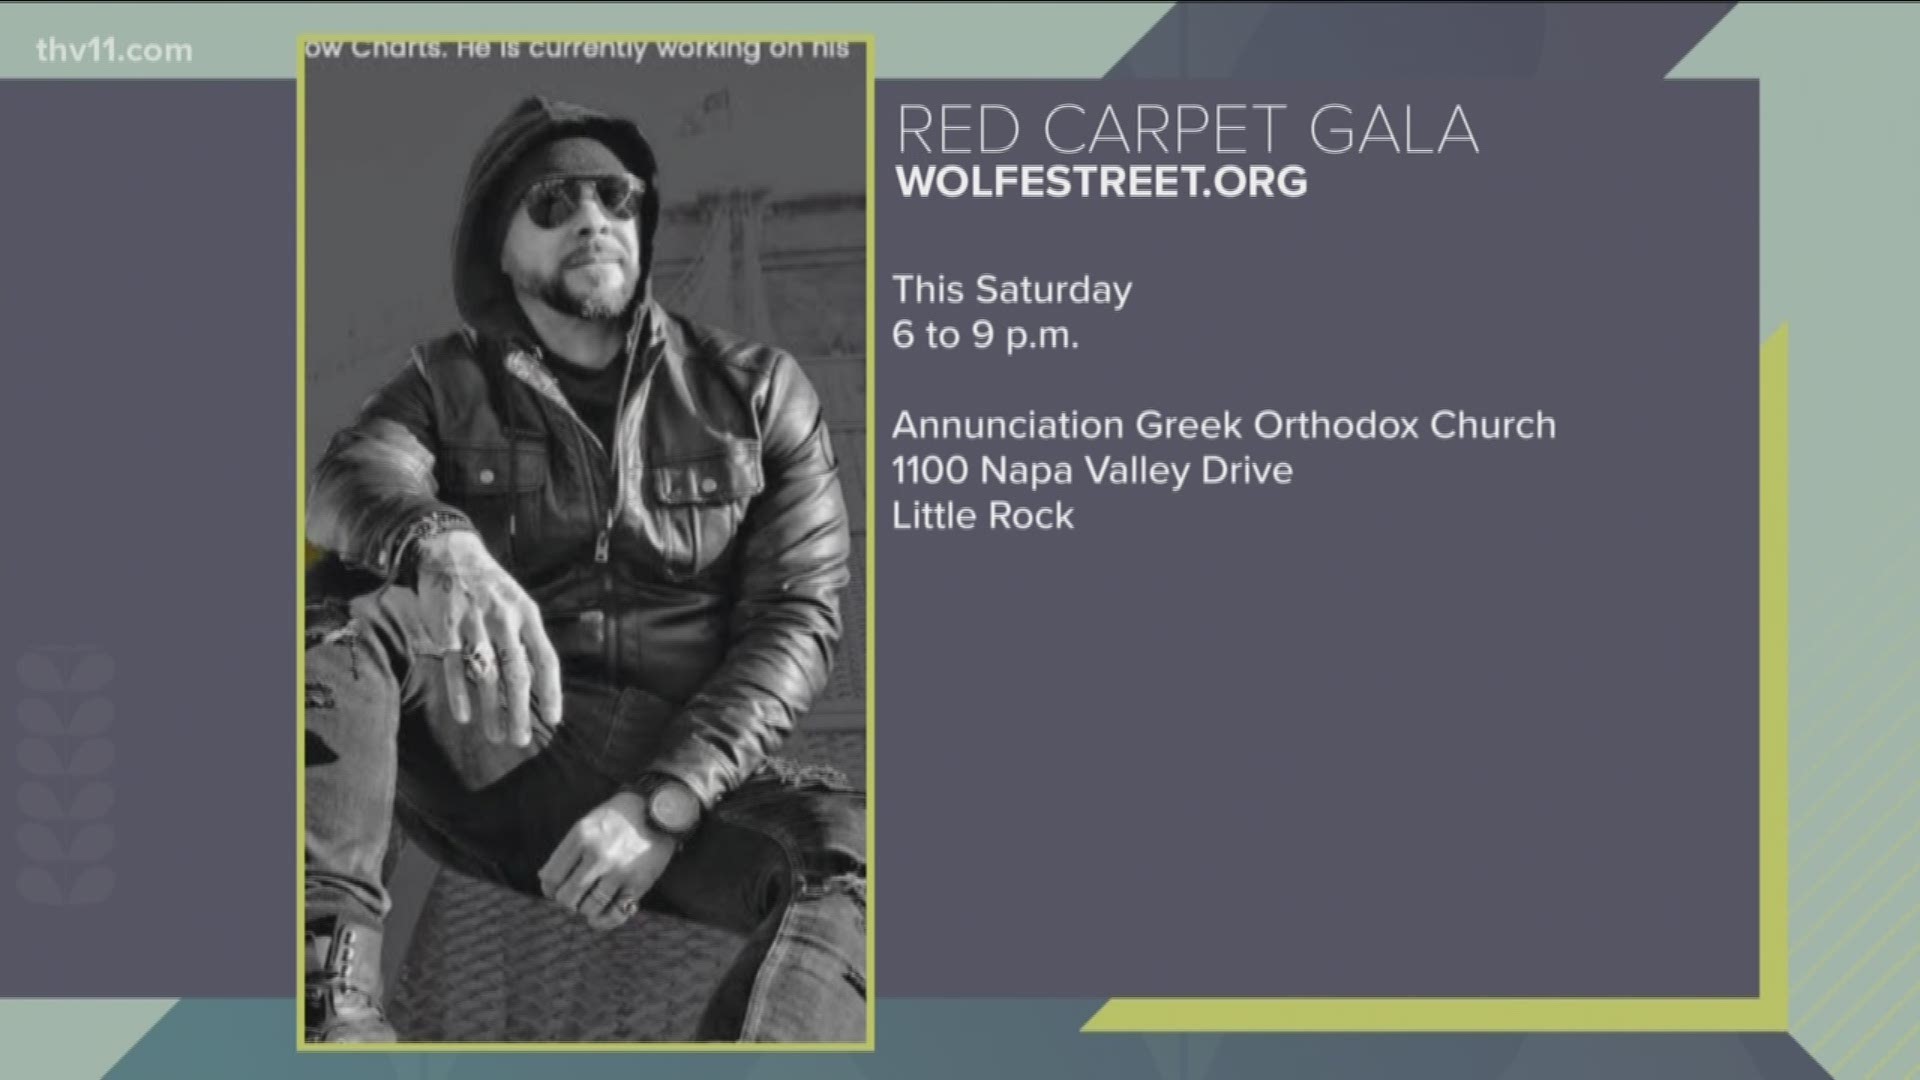 Jared Blake will be performing in Little Rock at the Wolfe Street's Red Carpet GALA.